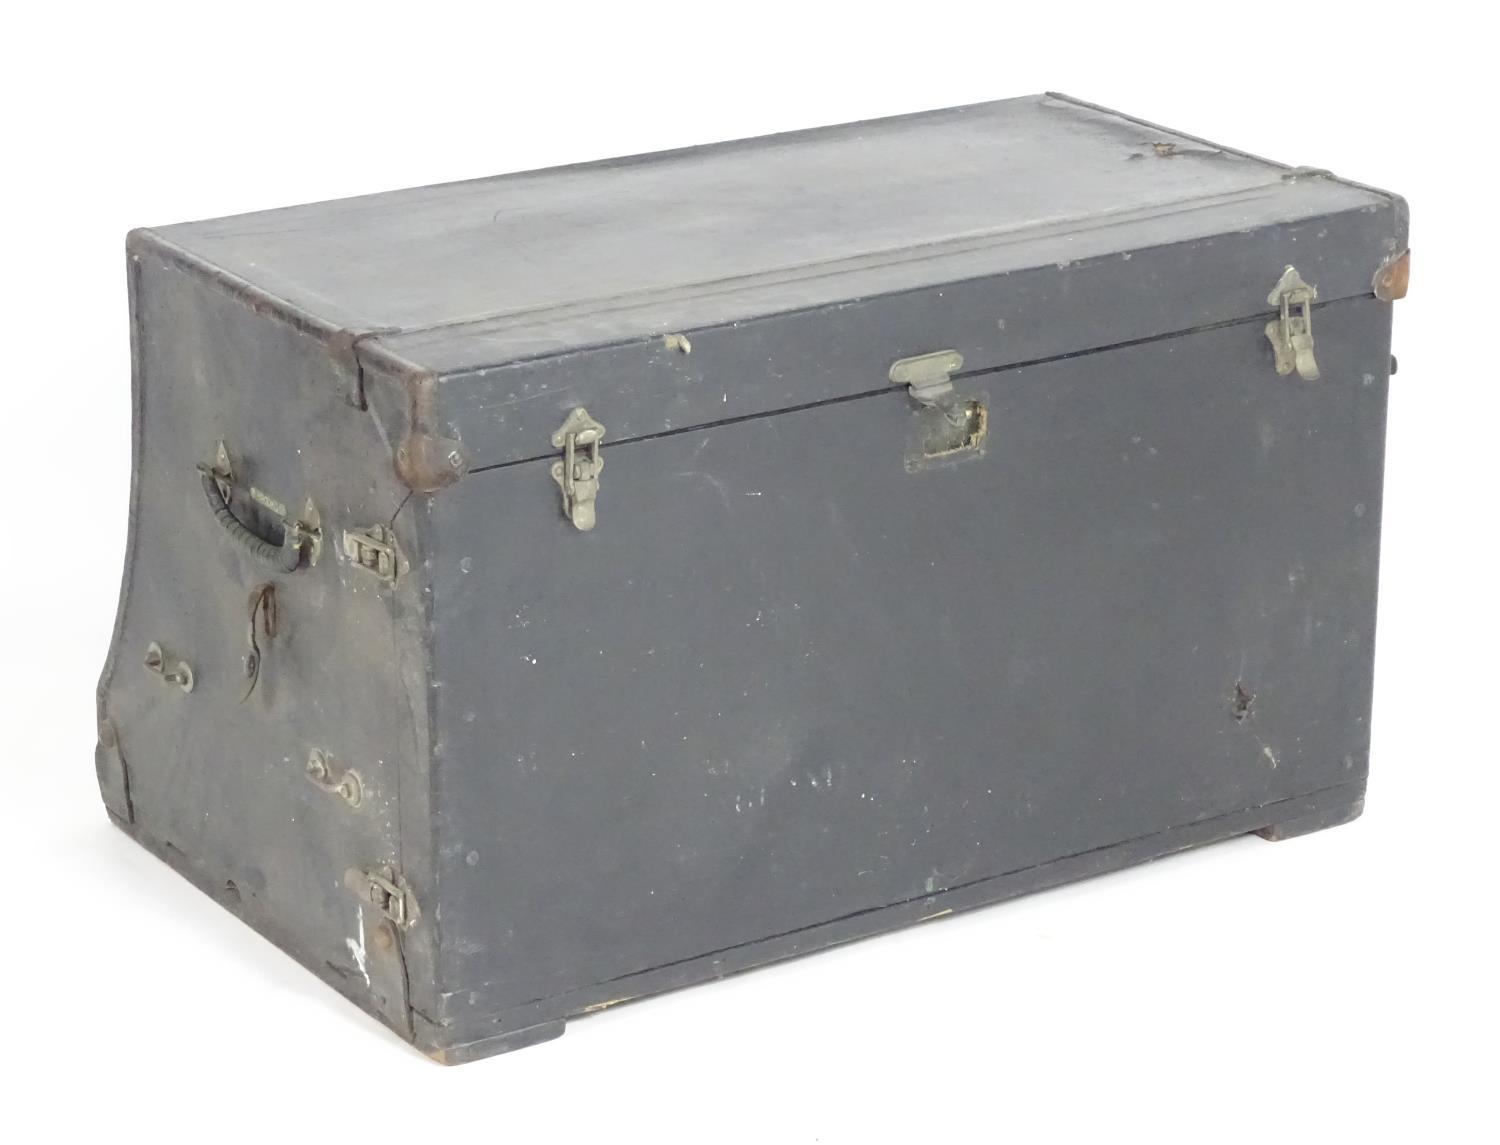 Classic cars, motoring: an early to mid 20thC Brooks external car trunk / luggage case, of